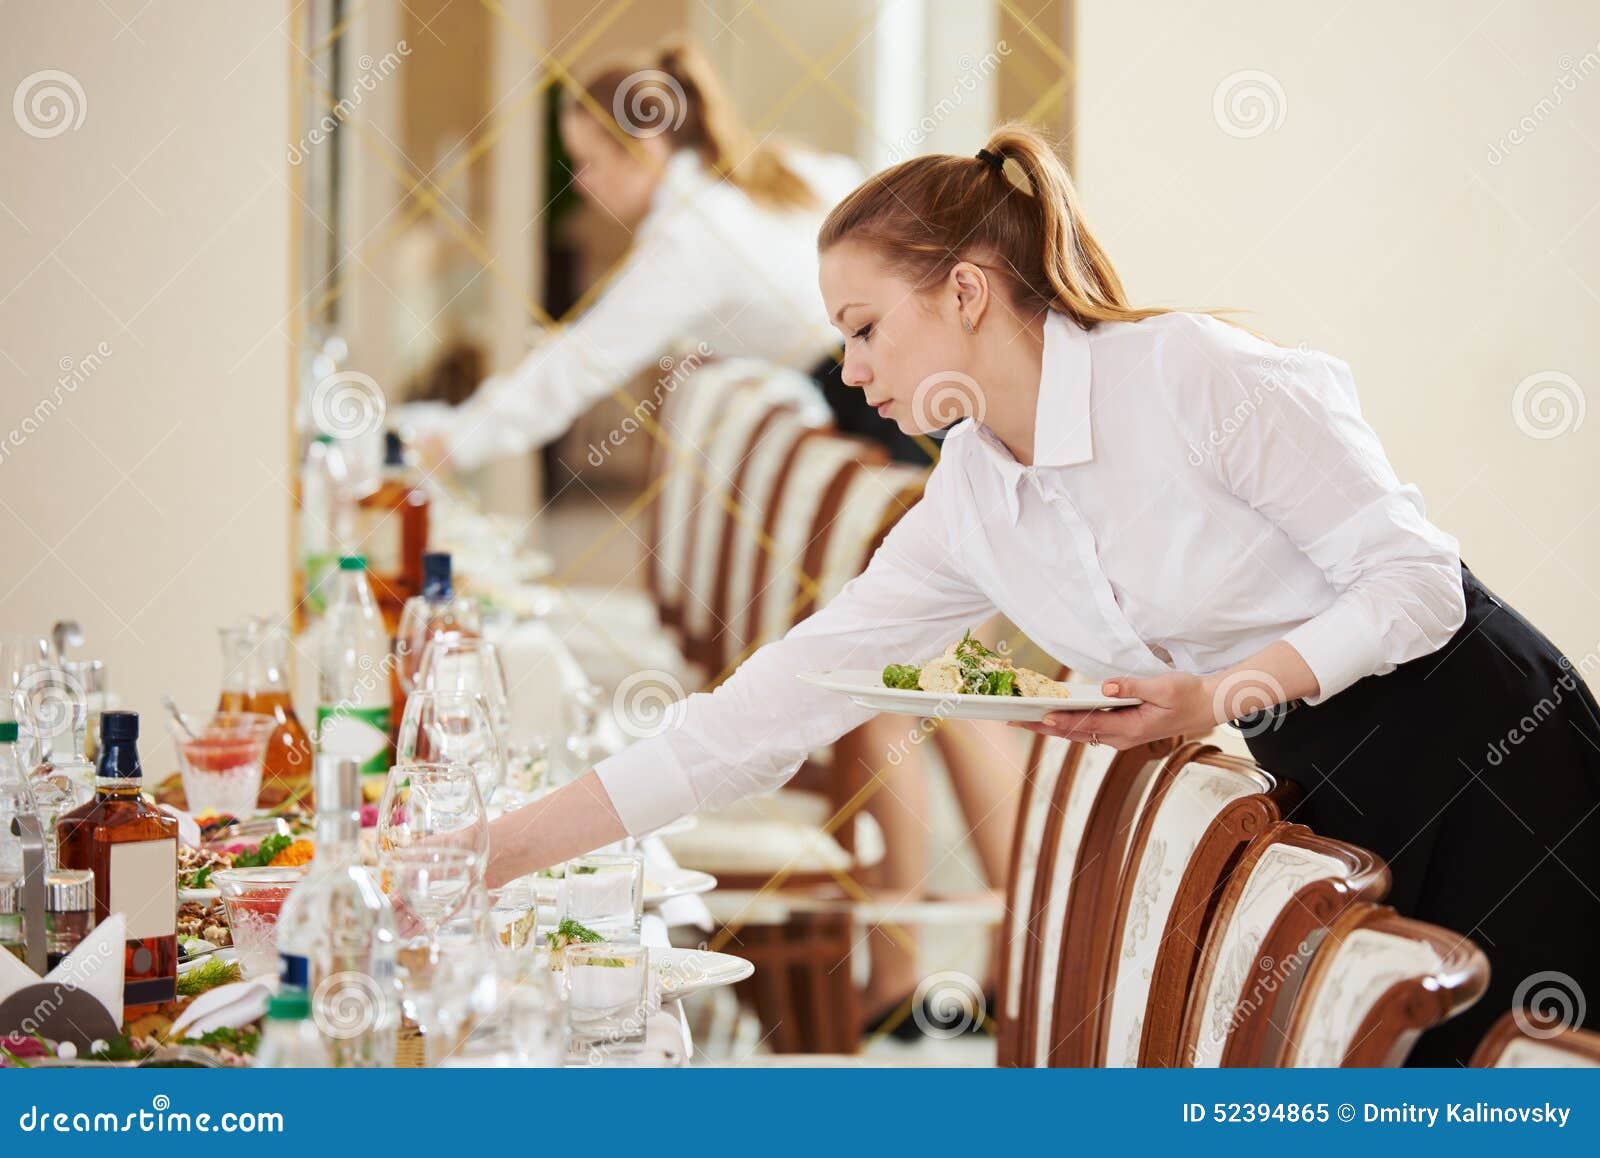 waitress at catering work in a restaurant